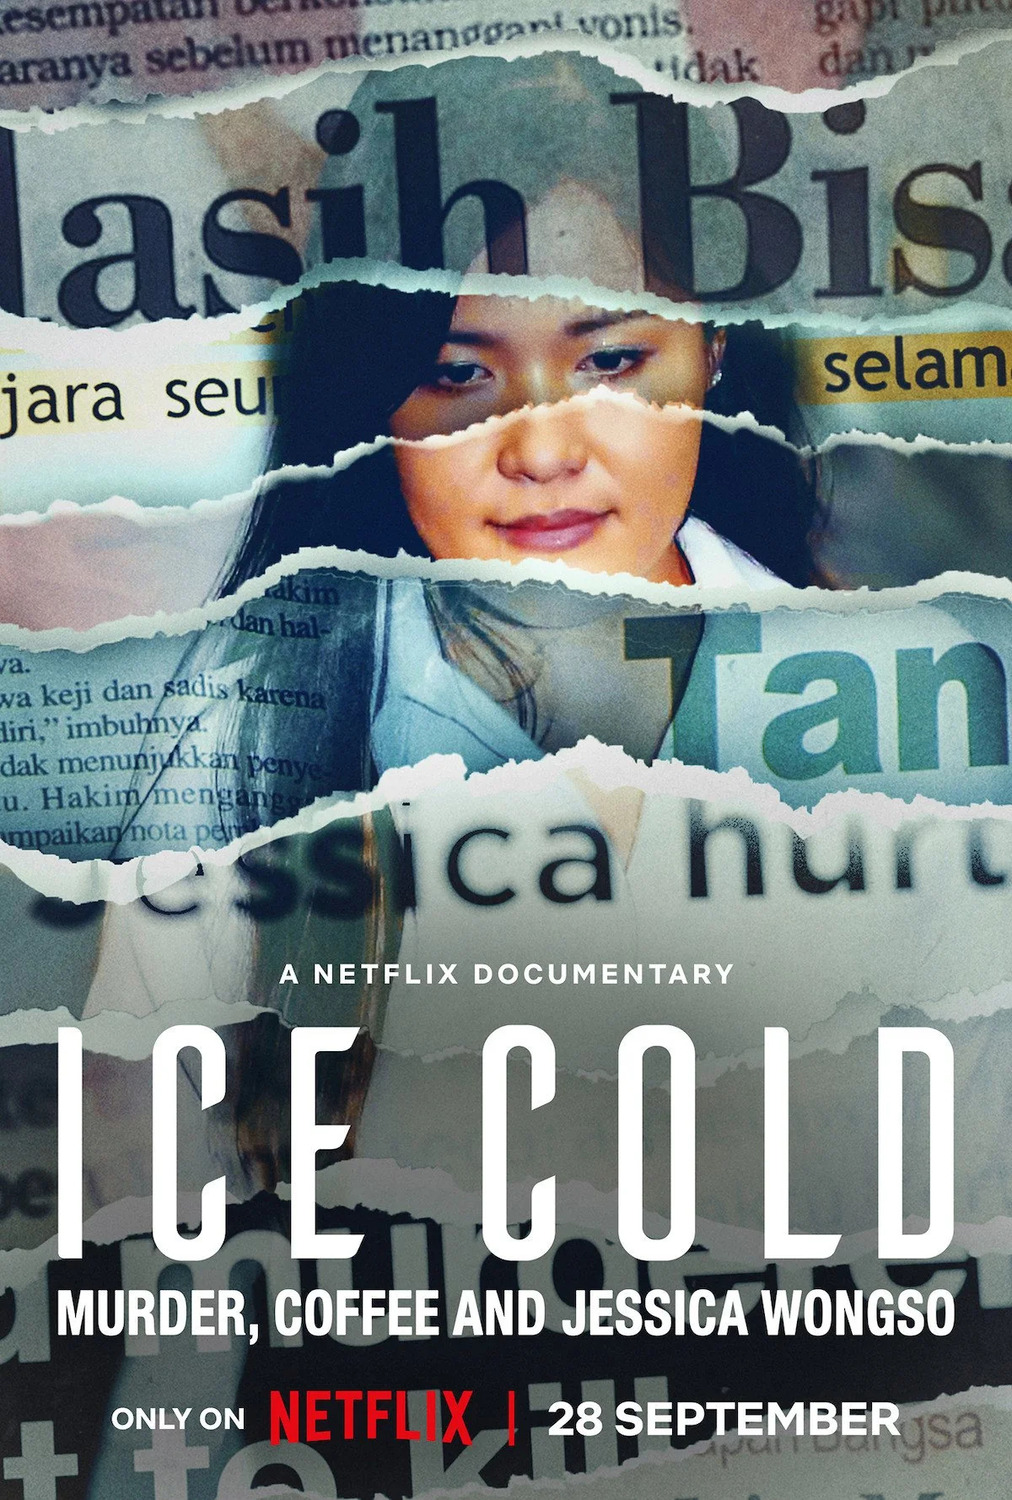 Extra Large Movie Poster Image for Ice Cold: Murder, Coffee and Jessica Wongso 